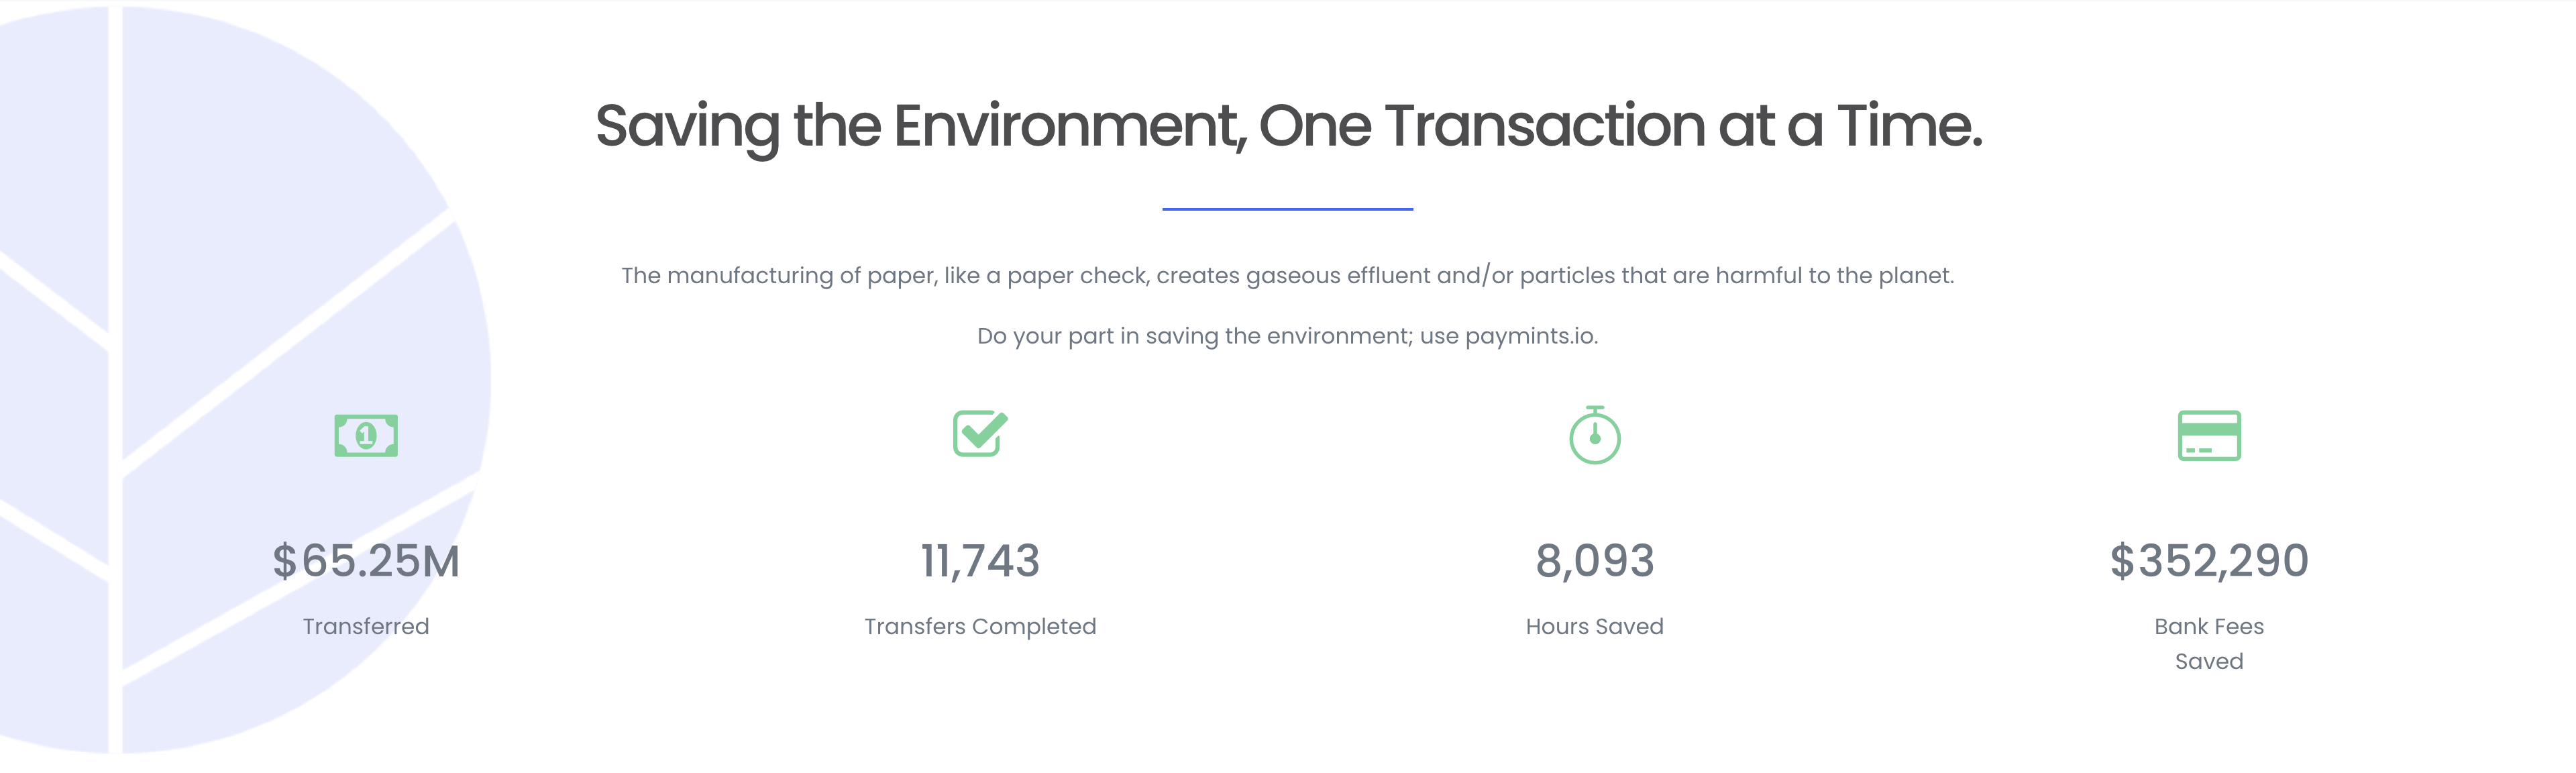 Paymints.io Statistics ($65.25M transferred, 11,743 transfers completed, 8,093 hours saved, $352,209 bank fees saved)